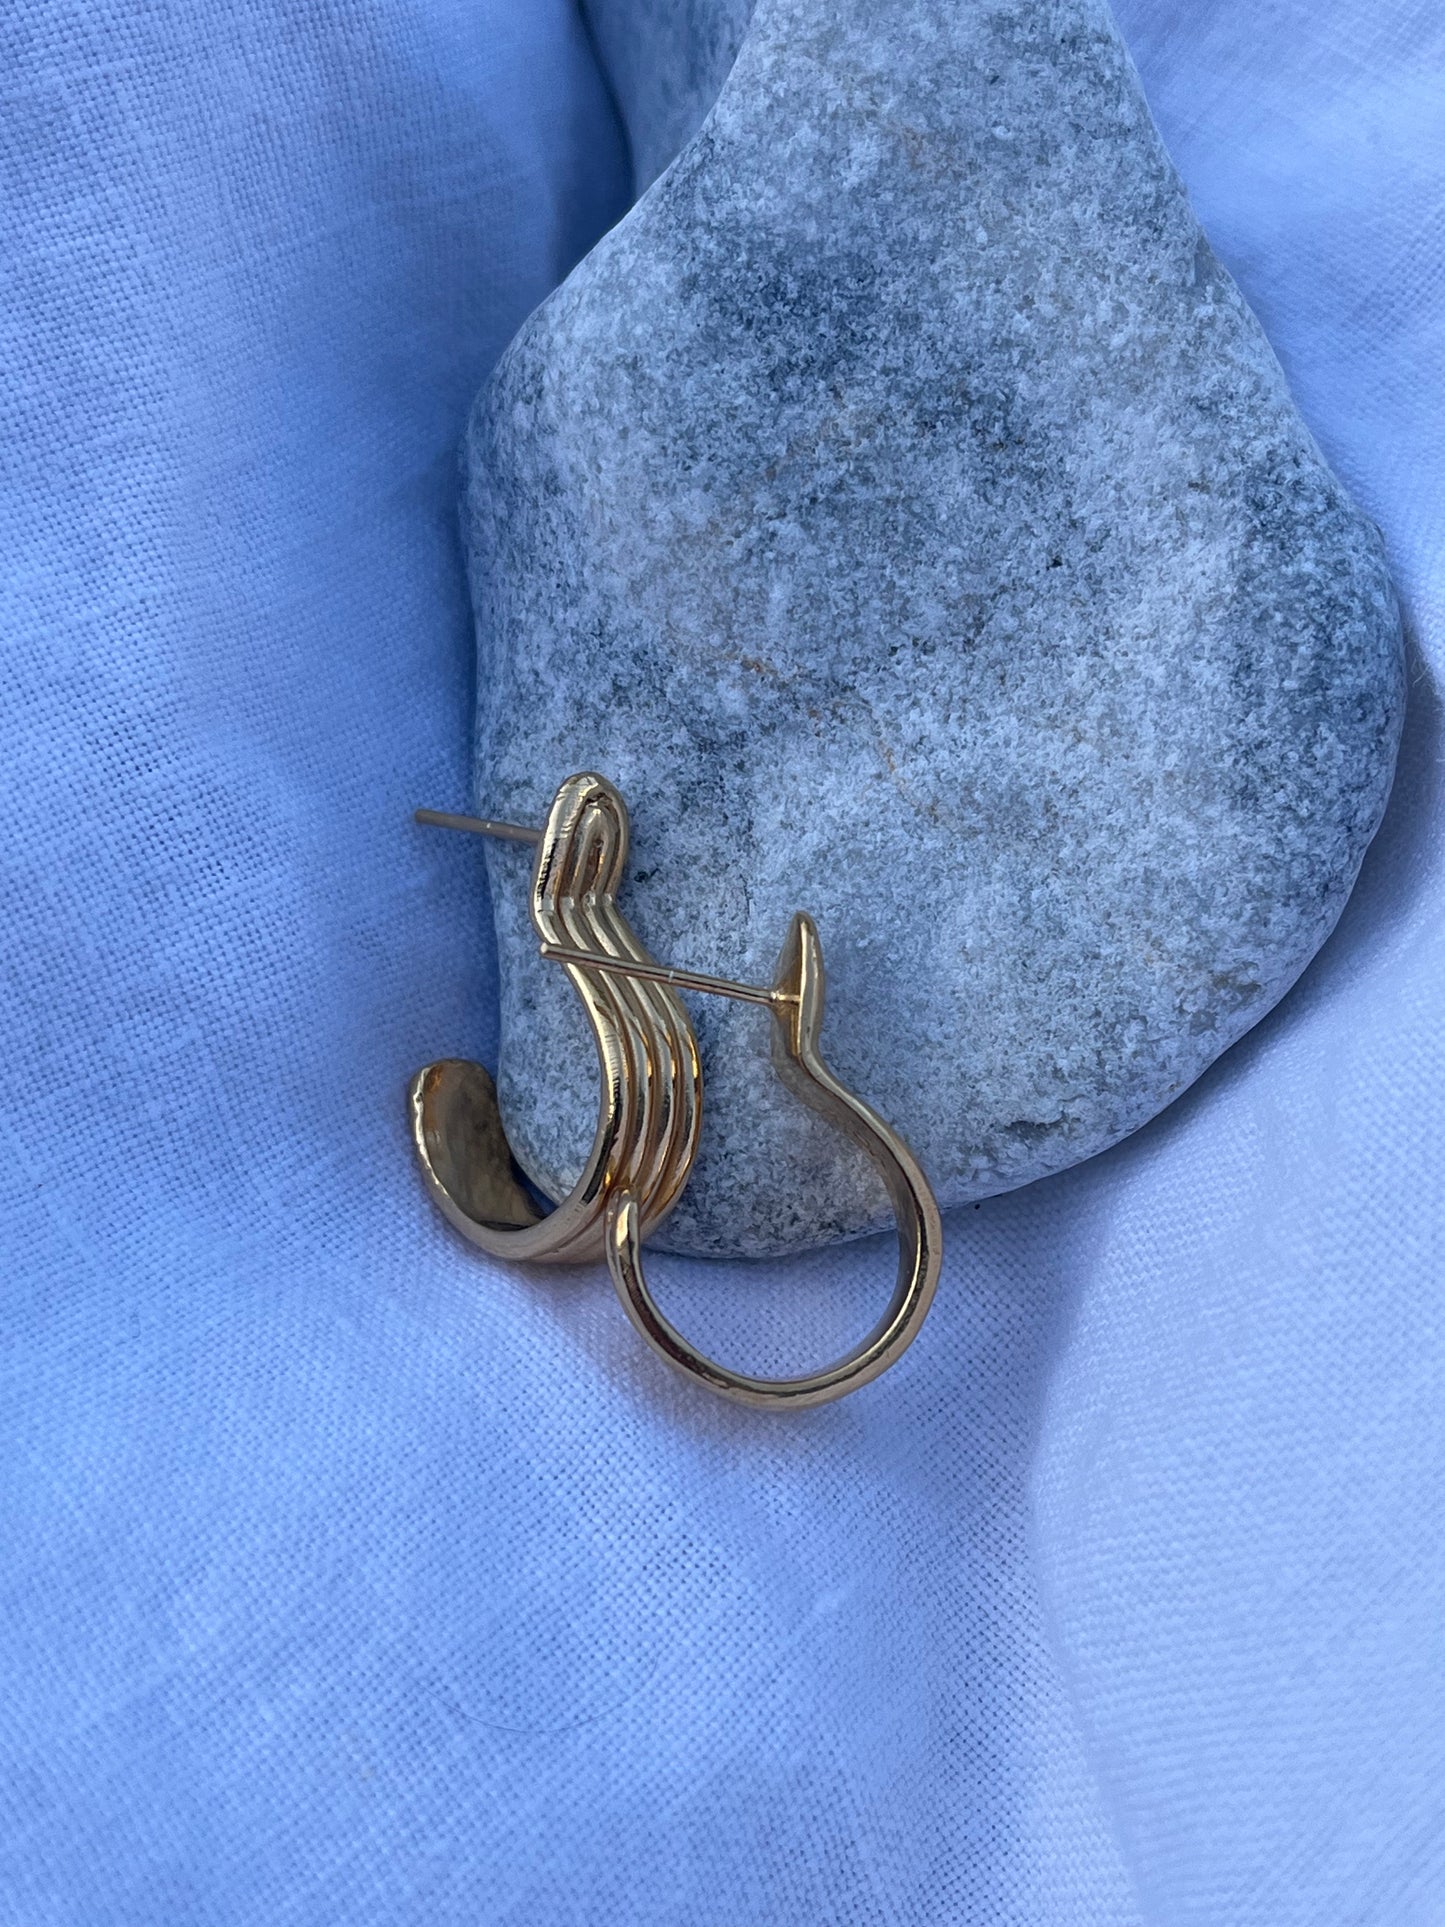 Gold hoop earrings with carved grooves and post backs